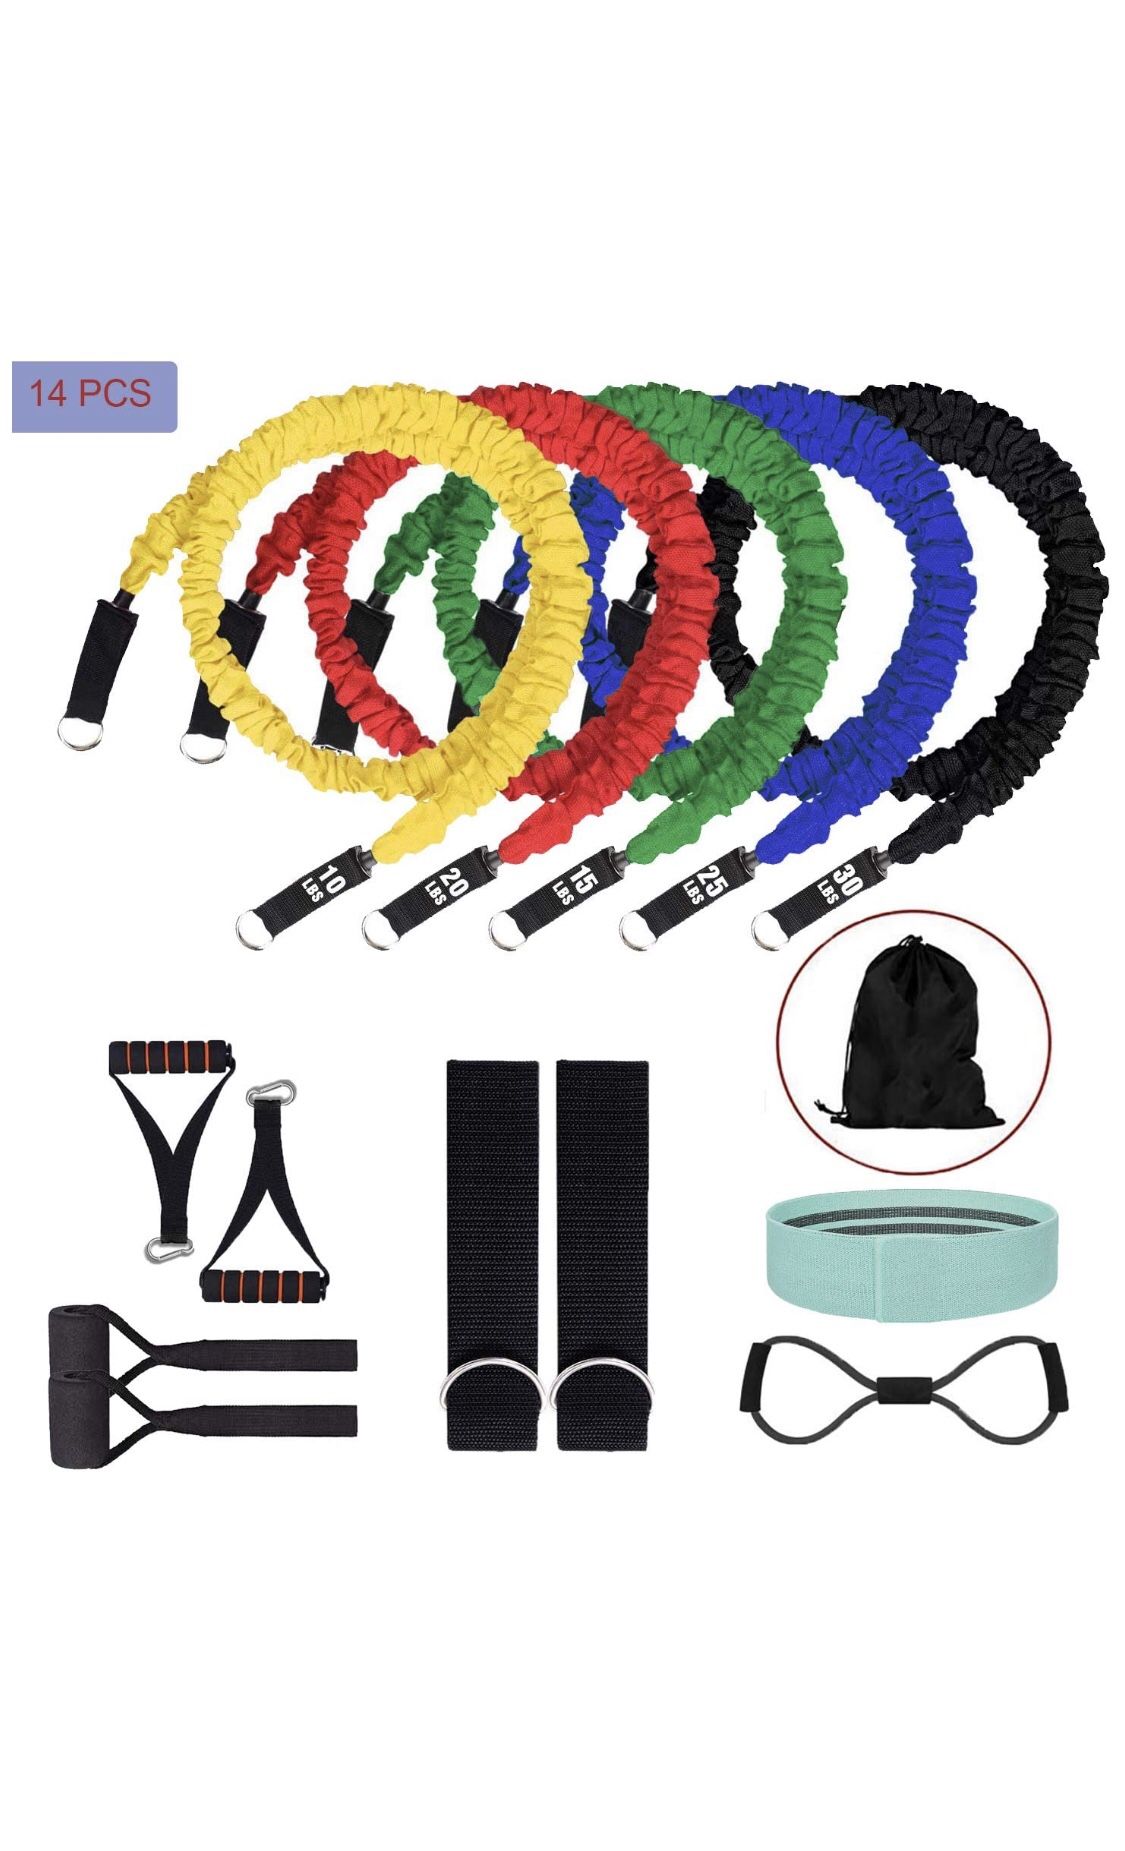 Daying 14 PCS Resistance Bands with Handles, Stackable Exercise Bands Kit, Nylon Sleeves Anti-Break Fitness Extreme Workout Equipment Set Total-Body